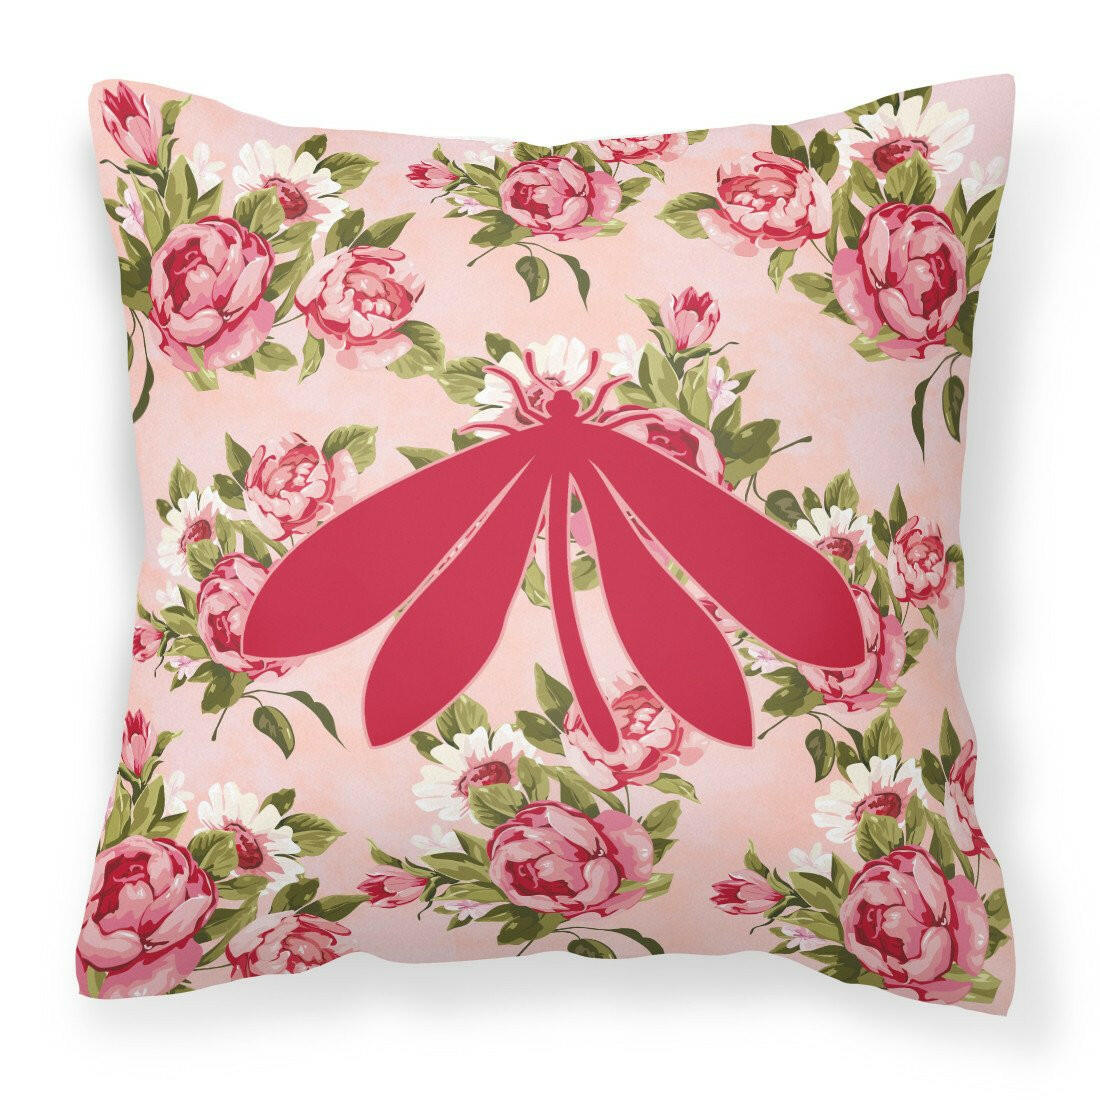 Moth Shabby Chic Pink Roses  Fabric Decorative Pillow BB1060-RS-PK-PW1414 - the-store.com